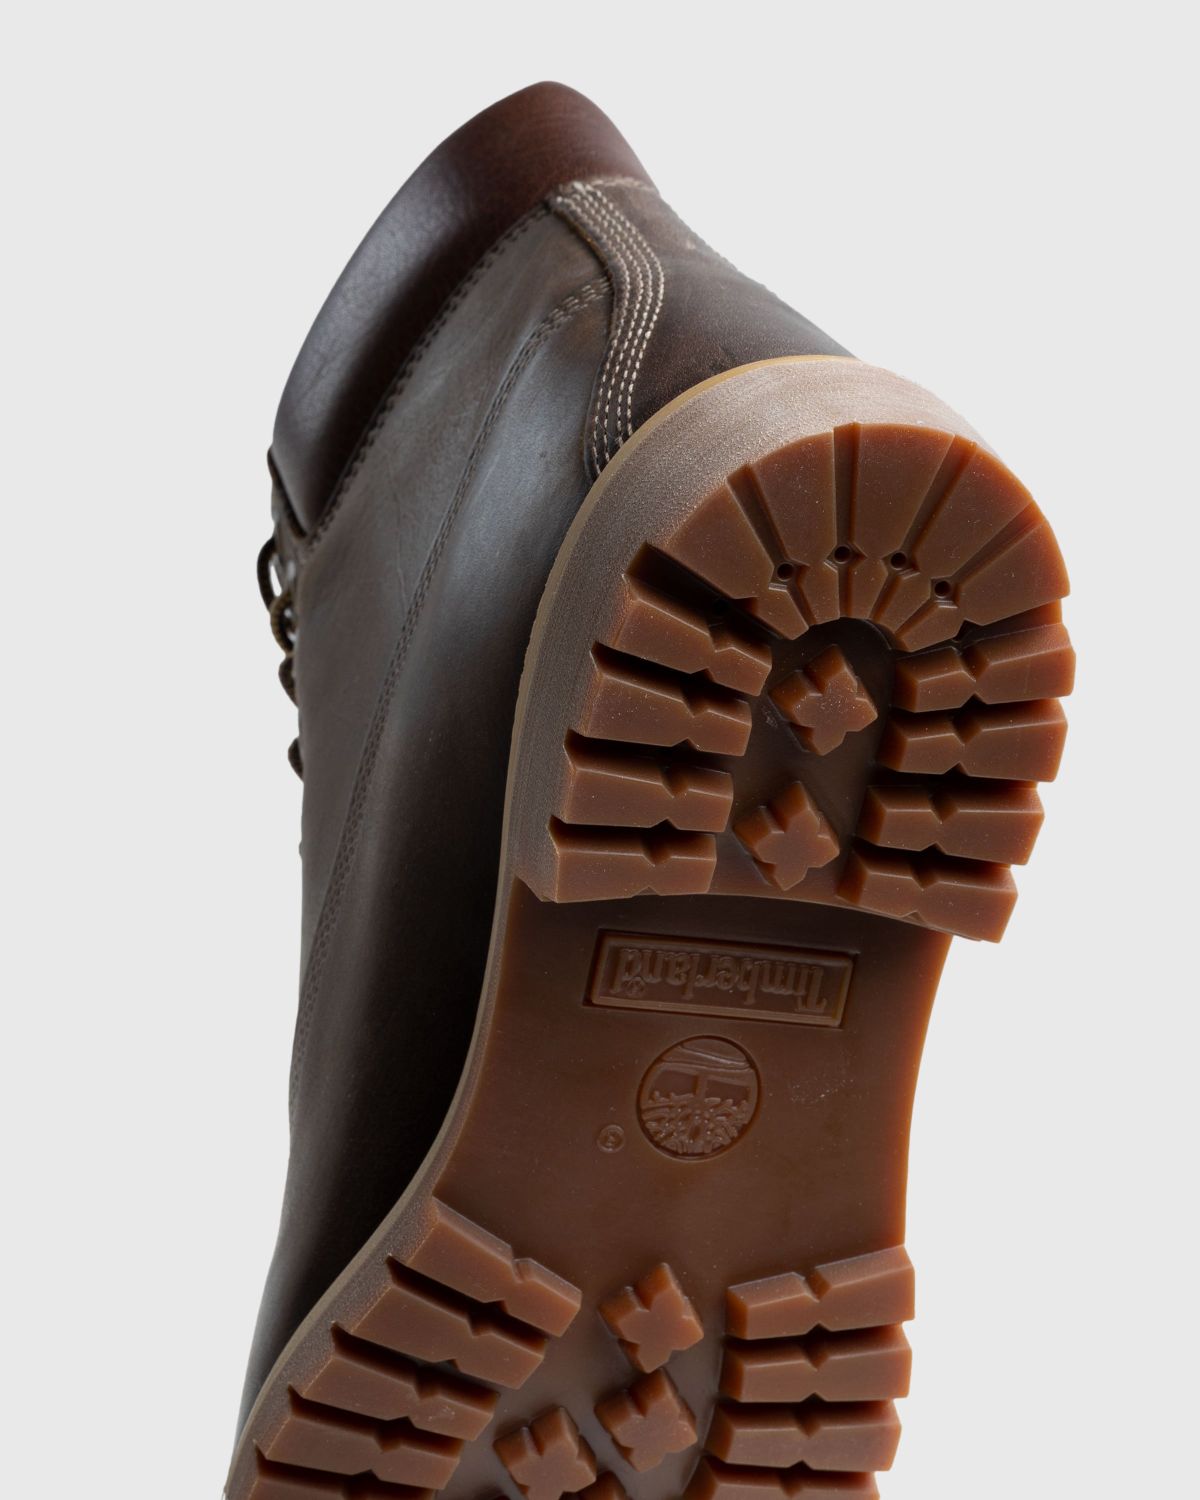 Timberland – Heritage 6 in Premium Brown - Laced Up Boots - Brown - Image 5